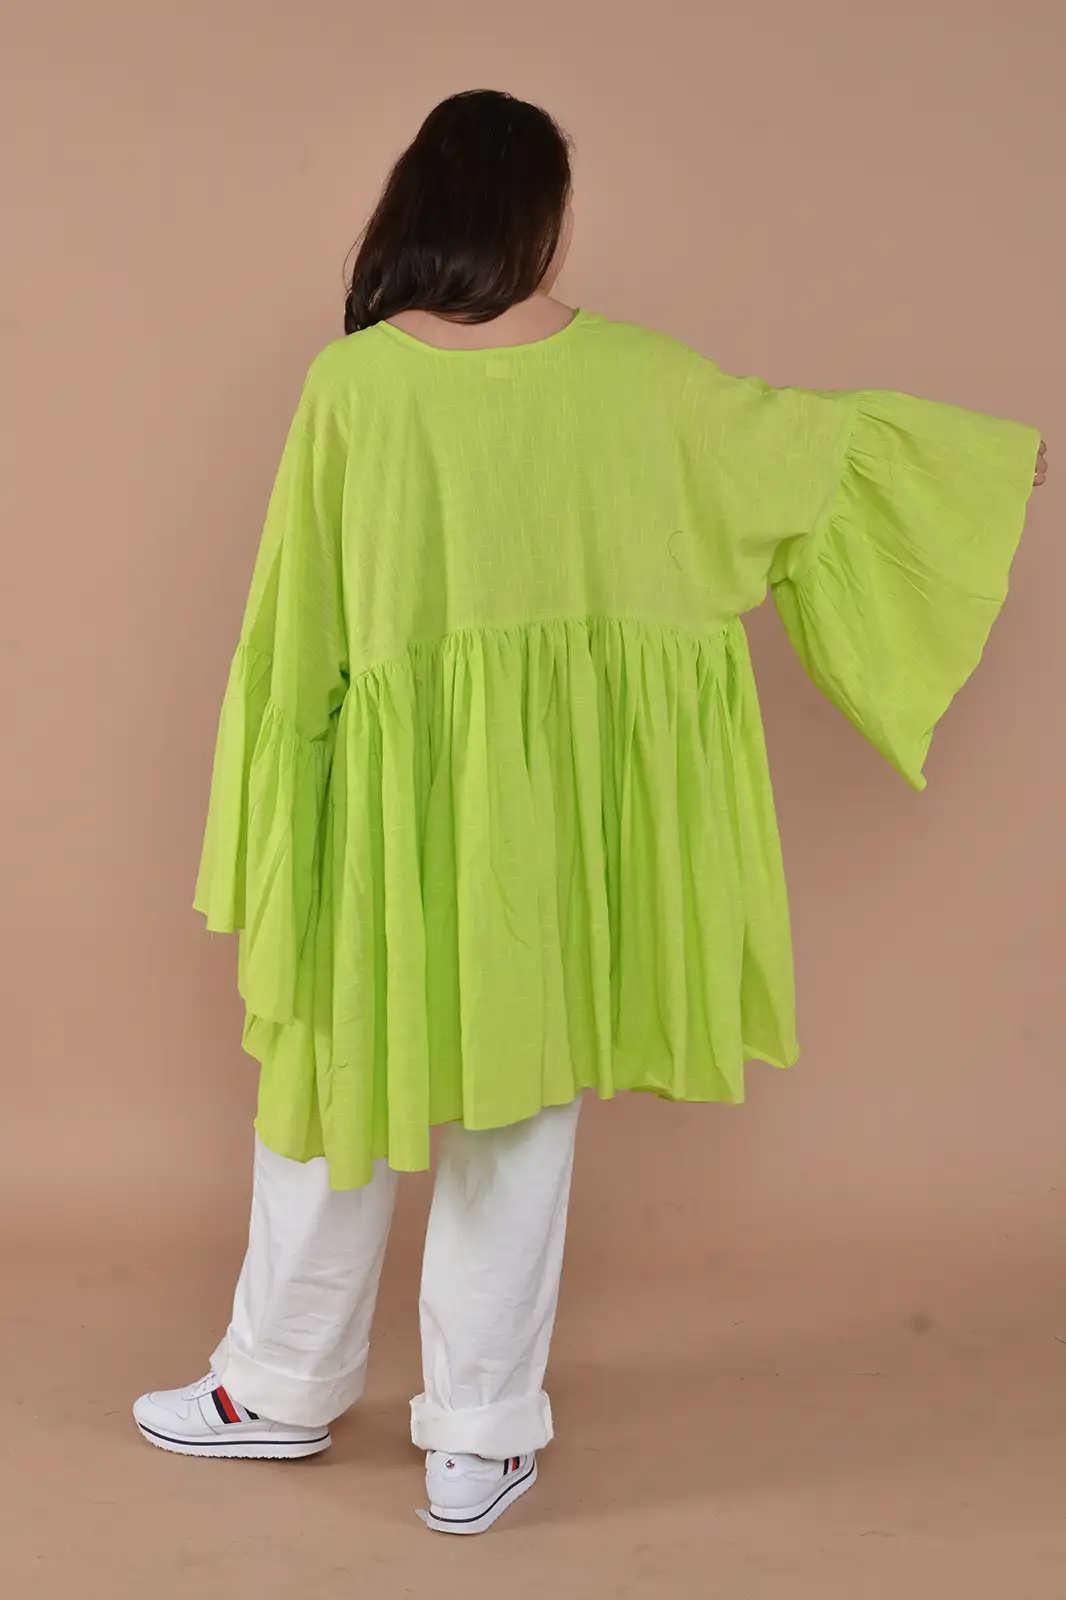 tarini oversized top solid lime green, oversized top for women, oversized t shirt, oversized t shirt women, oversized t shirt women, top for women, women clothing, organic clothing, trendy top for women, stylish top for women, full sleeves top for women, Sepia Stories